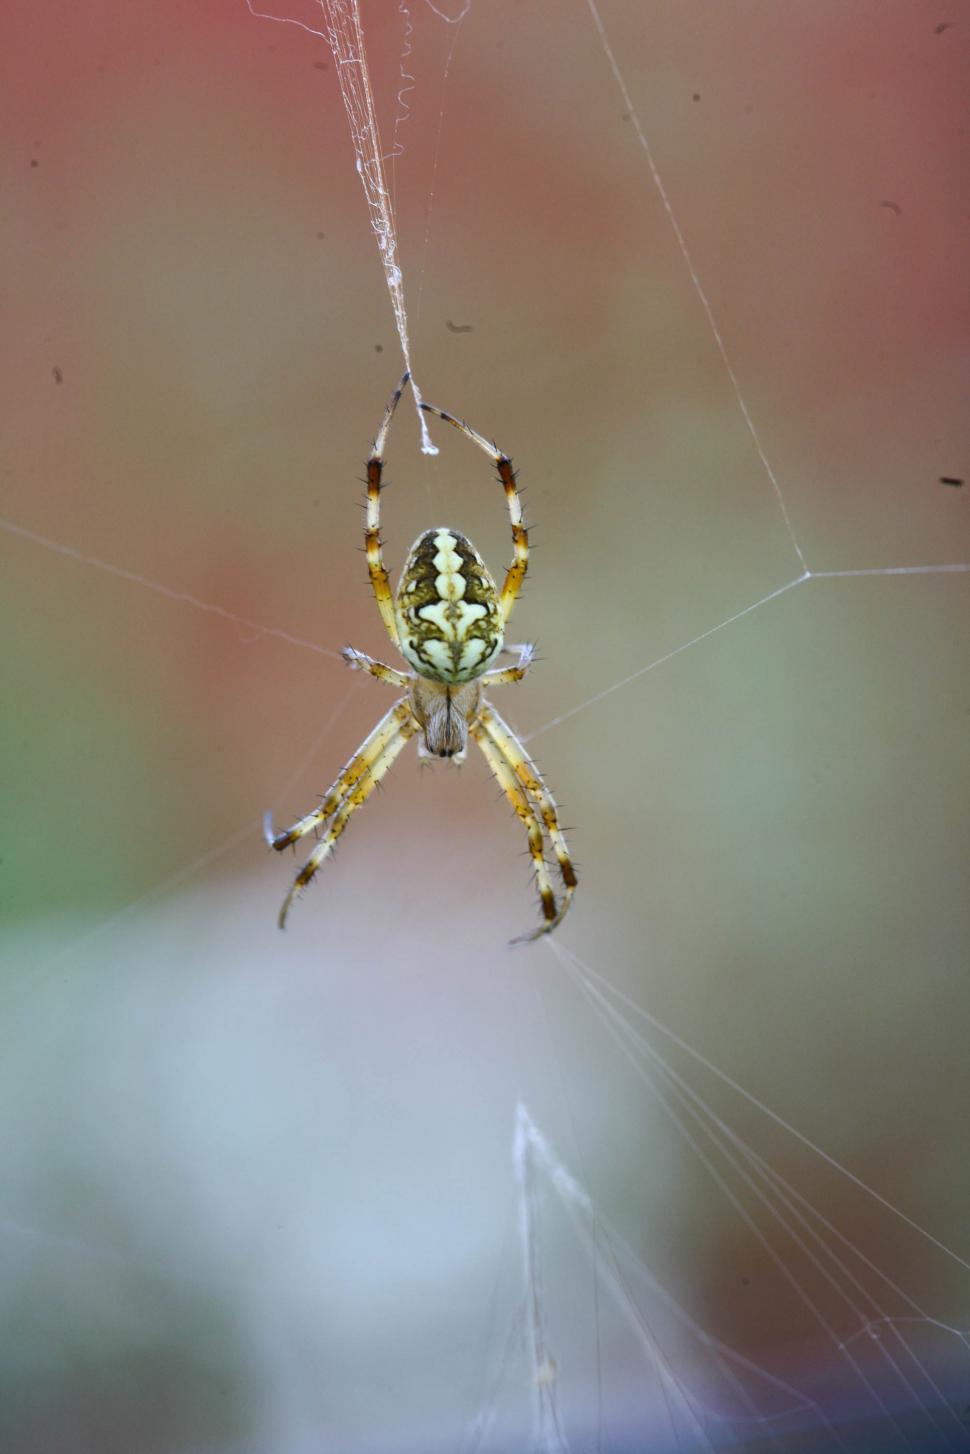 Free Image of Spider on a Web 